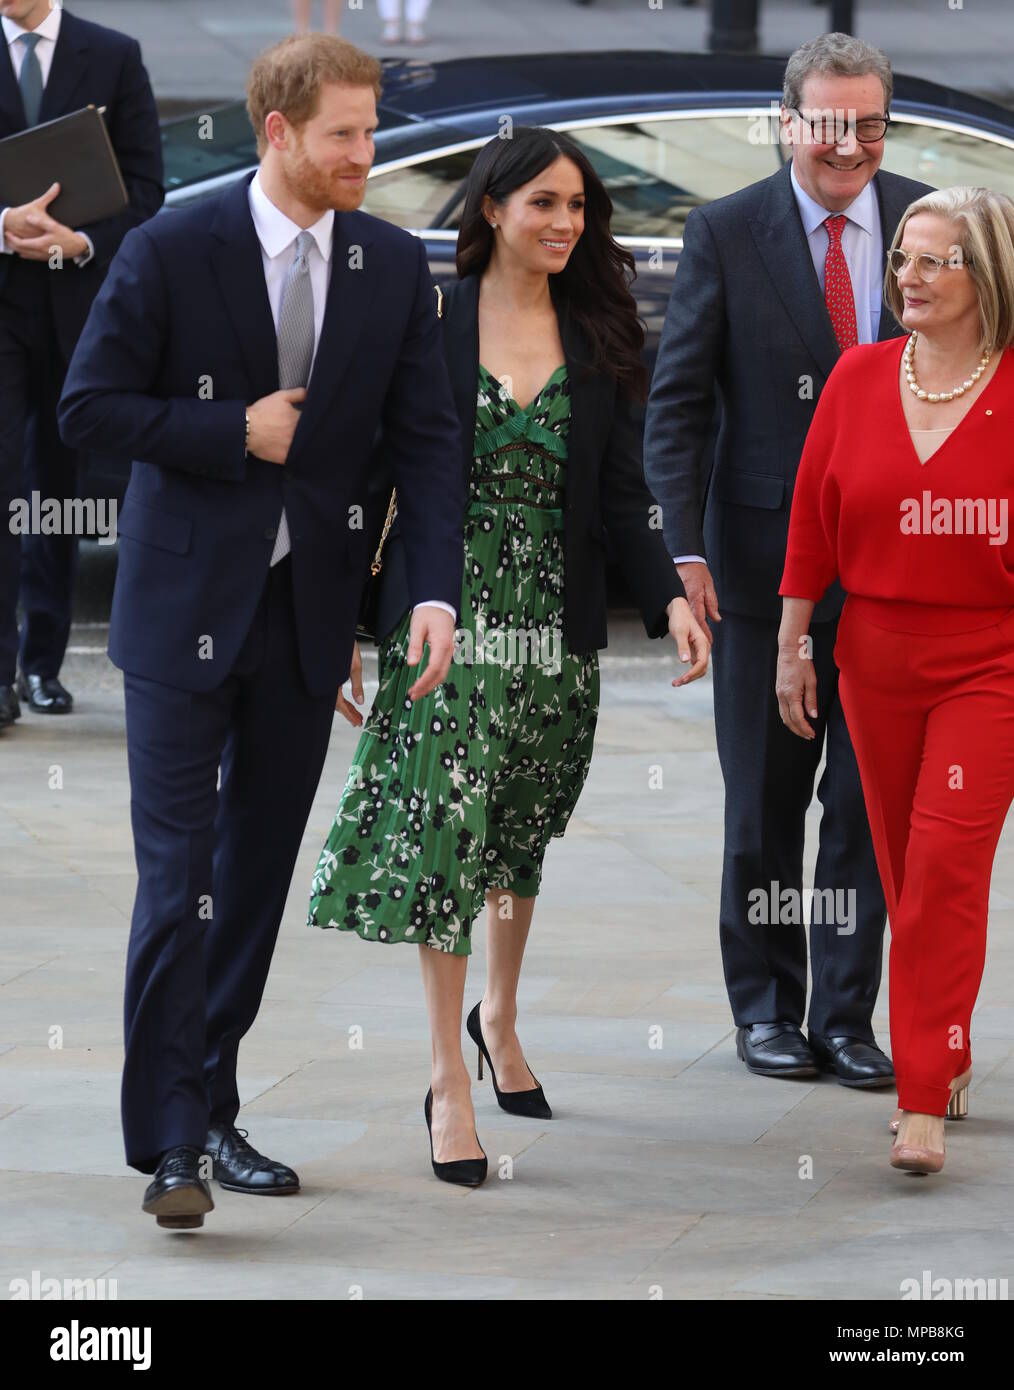 Prince Harry and Meghan Markle arrive at Australia House in London to meet with the Australian High Commissioner in the lead up to Invictus Games.  Featuring: Prince Harry, Meghan Markle, Lucy Turnbull, Australian High Commissioner Alexander Downer Where: London, United Kingdom When: 21 Apr 2018 Credit: David Sims/WENN.com Stock Photo